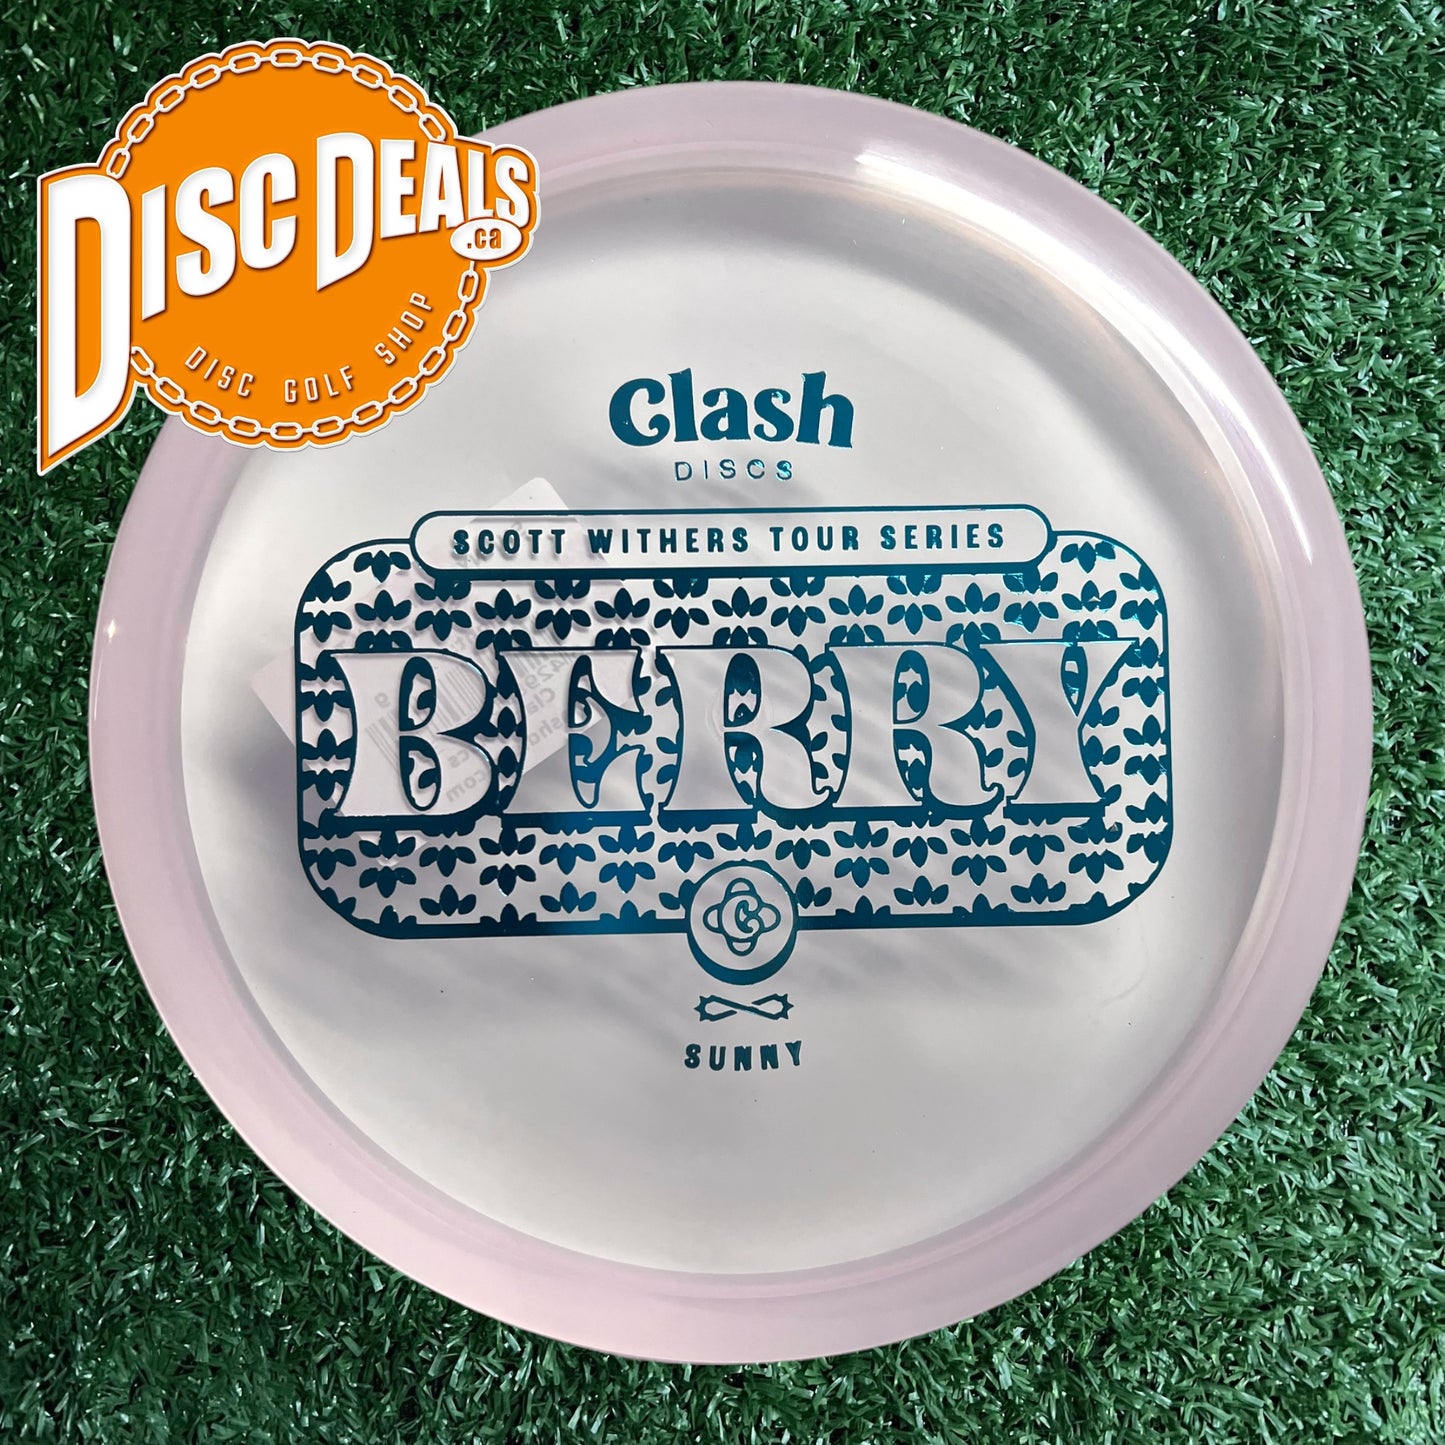 Clash Discs Berry - Sunny - Scott Withers Tour Series